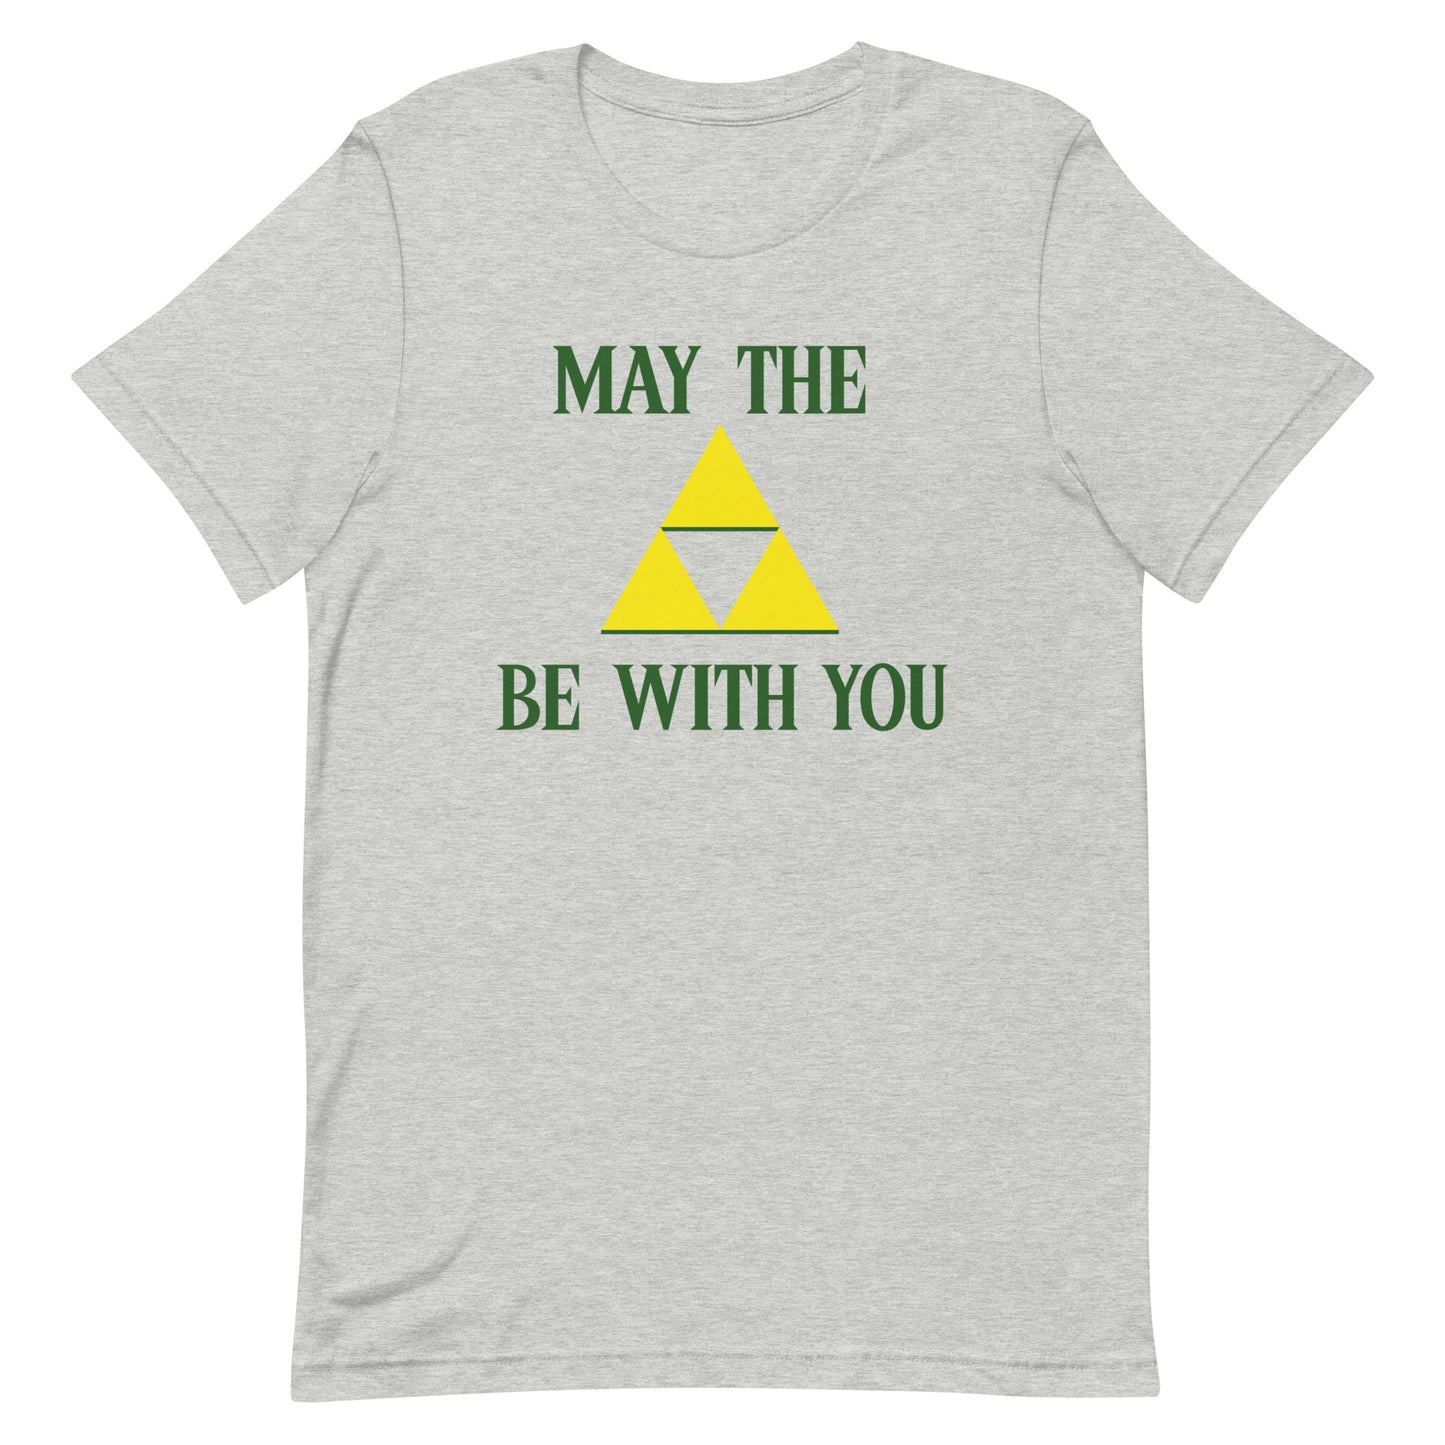 A Link To The Force Men's Signature Tee